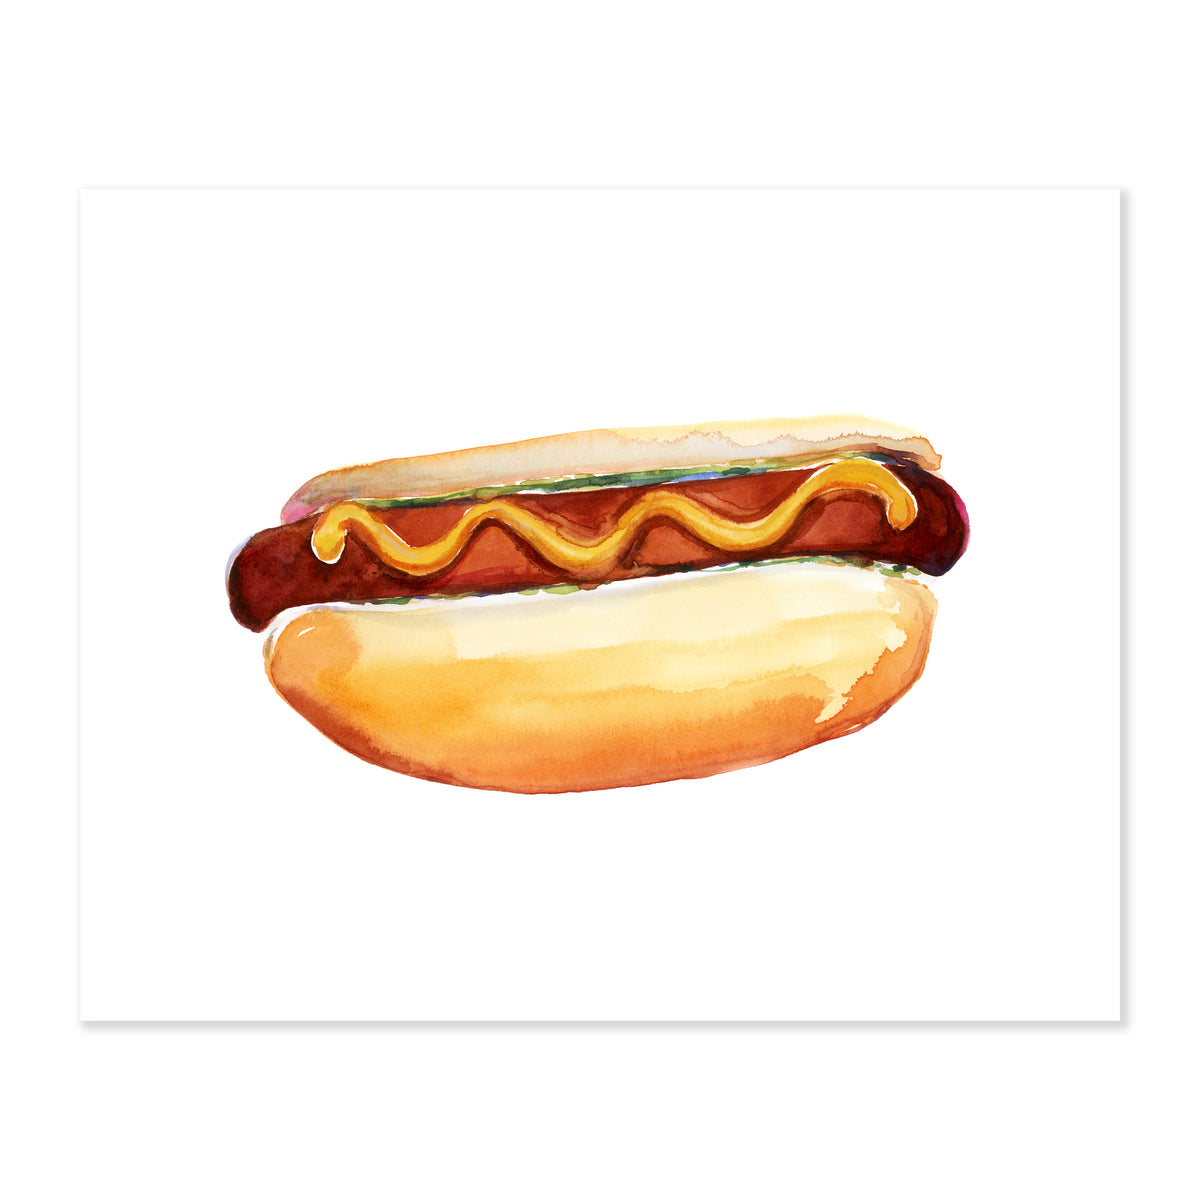 A fine art print illustrating a mustard covered hot dog in a golden bun painted with watercolor on a soft white background